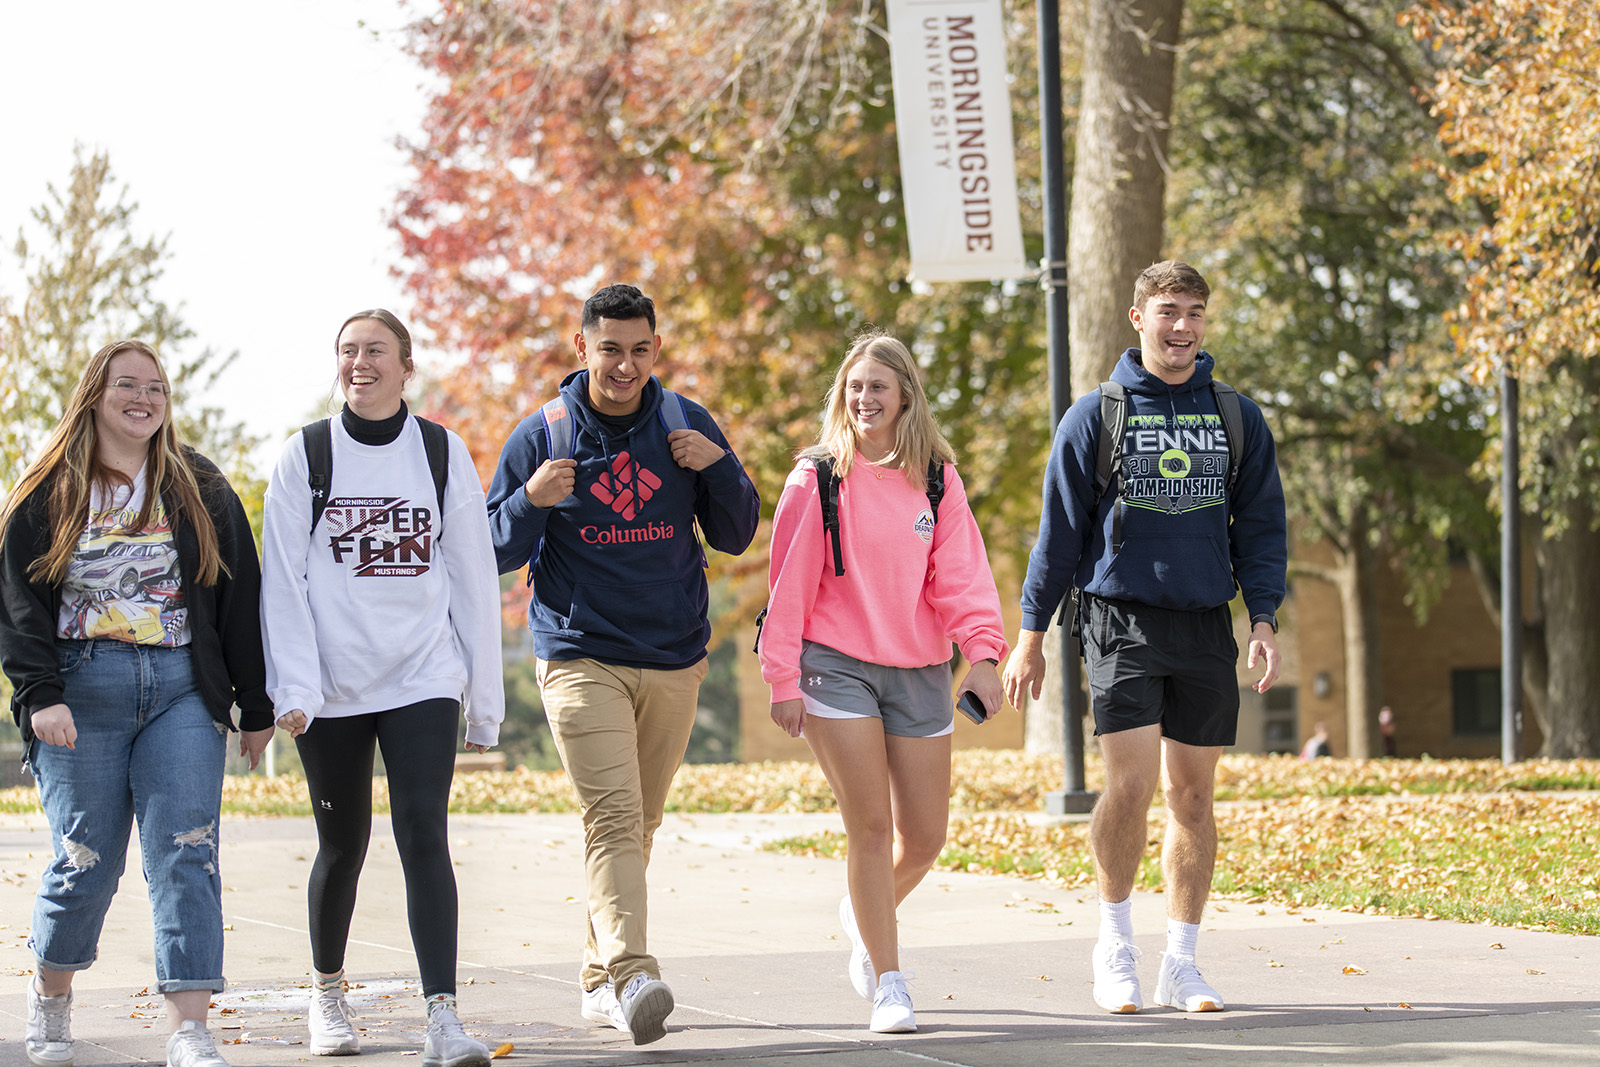 Students walking together in autumn